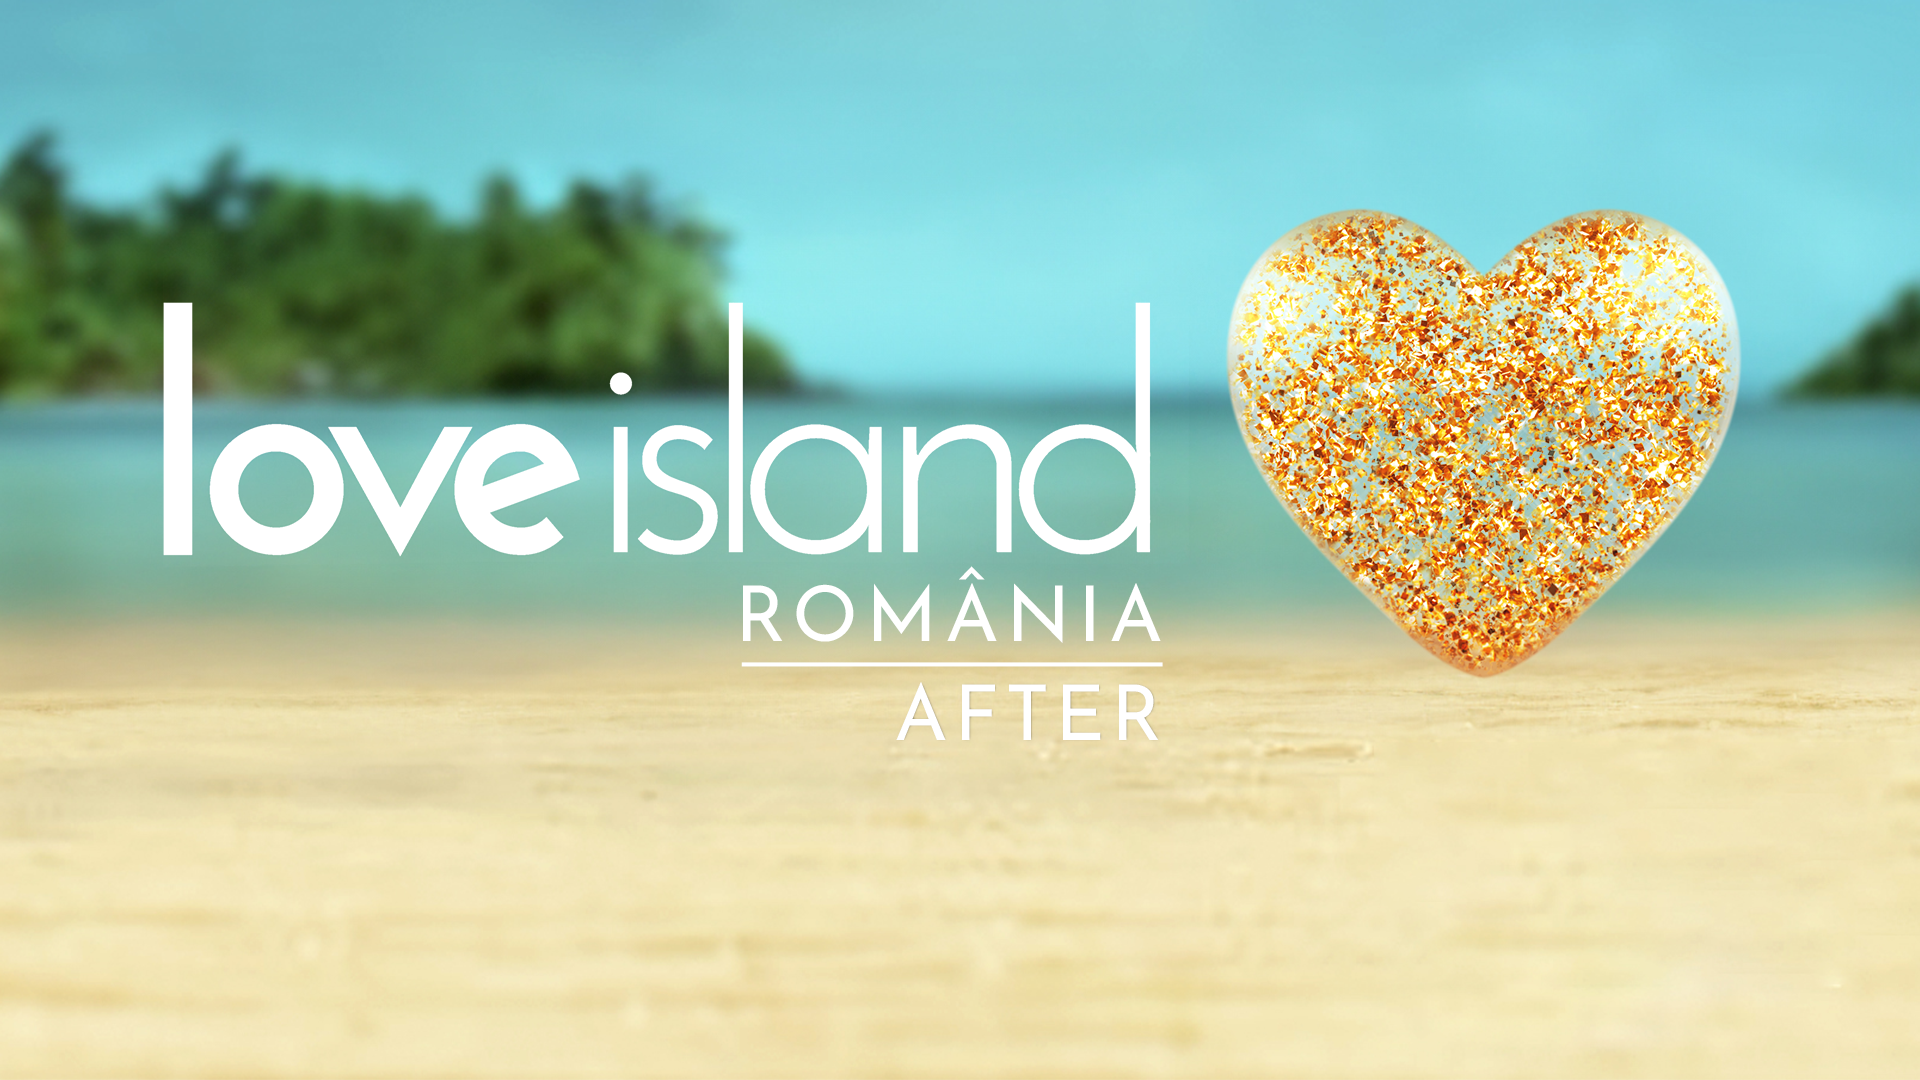 Love Island: After